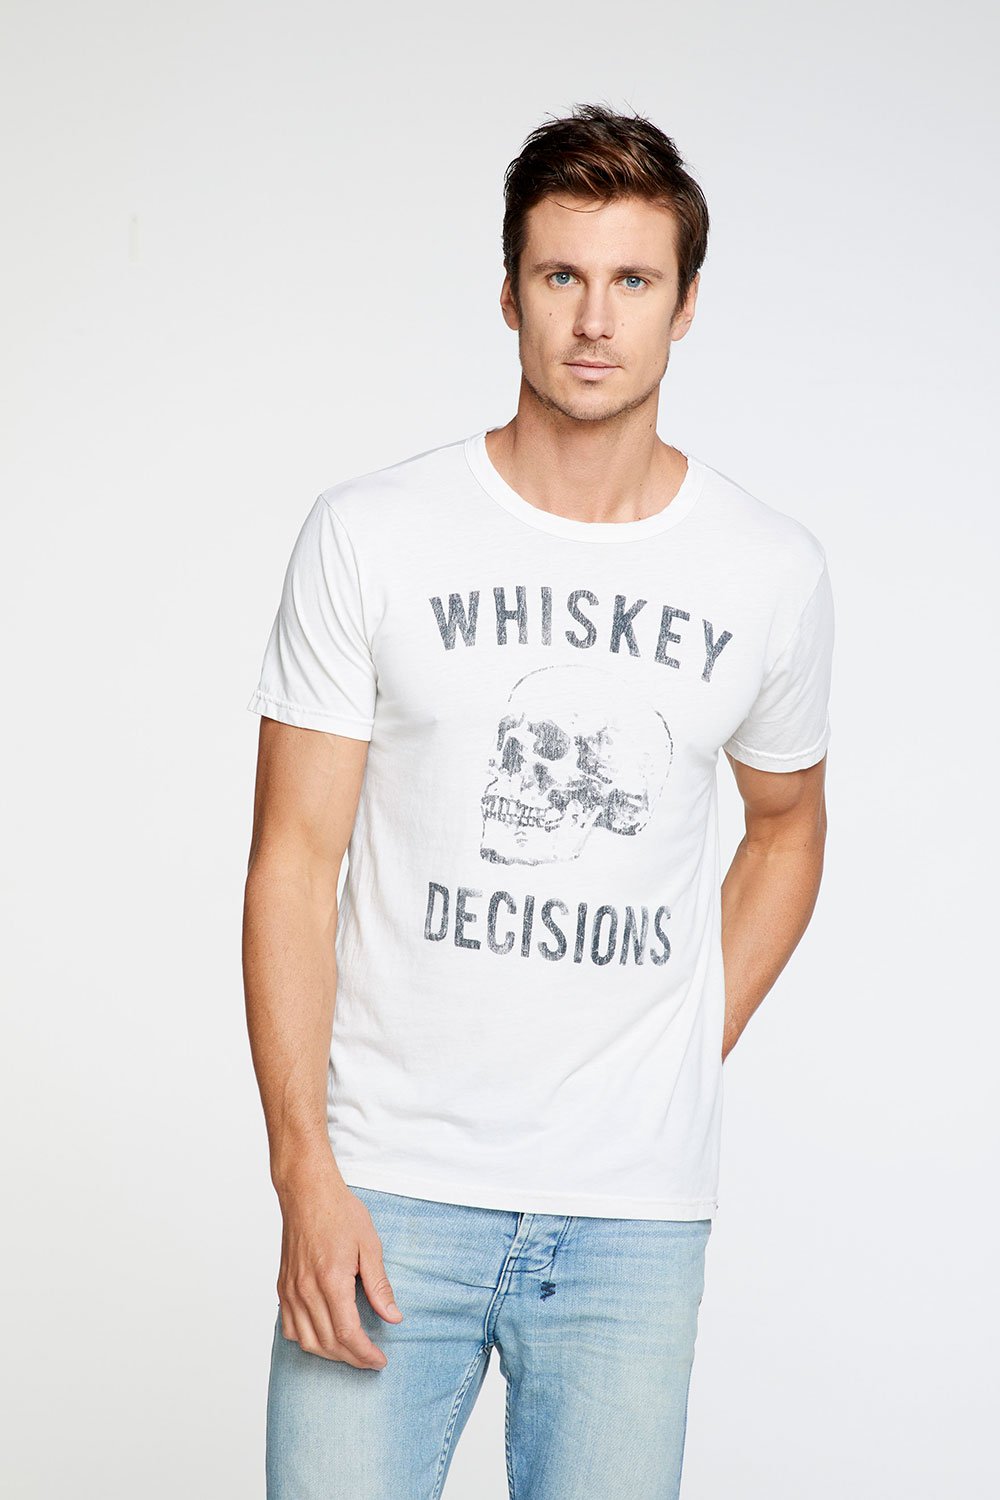 Whiskey Decisions Tee | Salt - West of Camden - Main Image Number 1 of 1